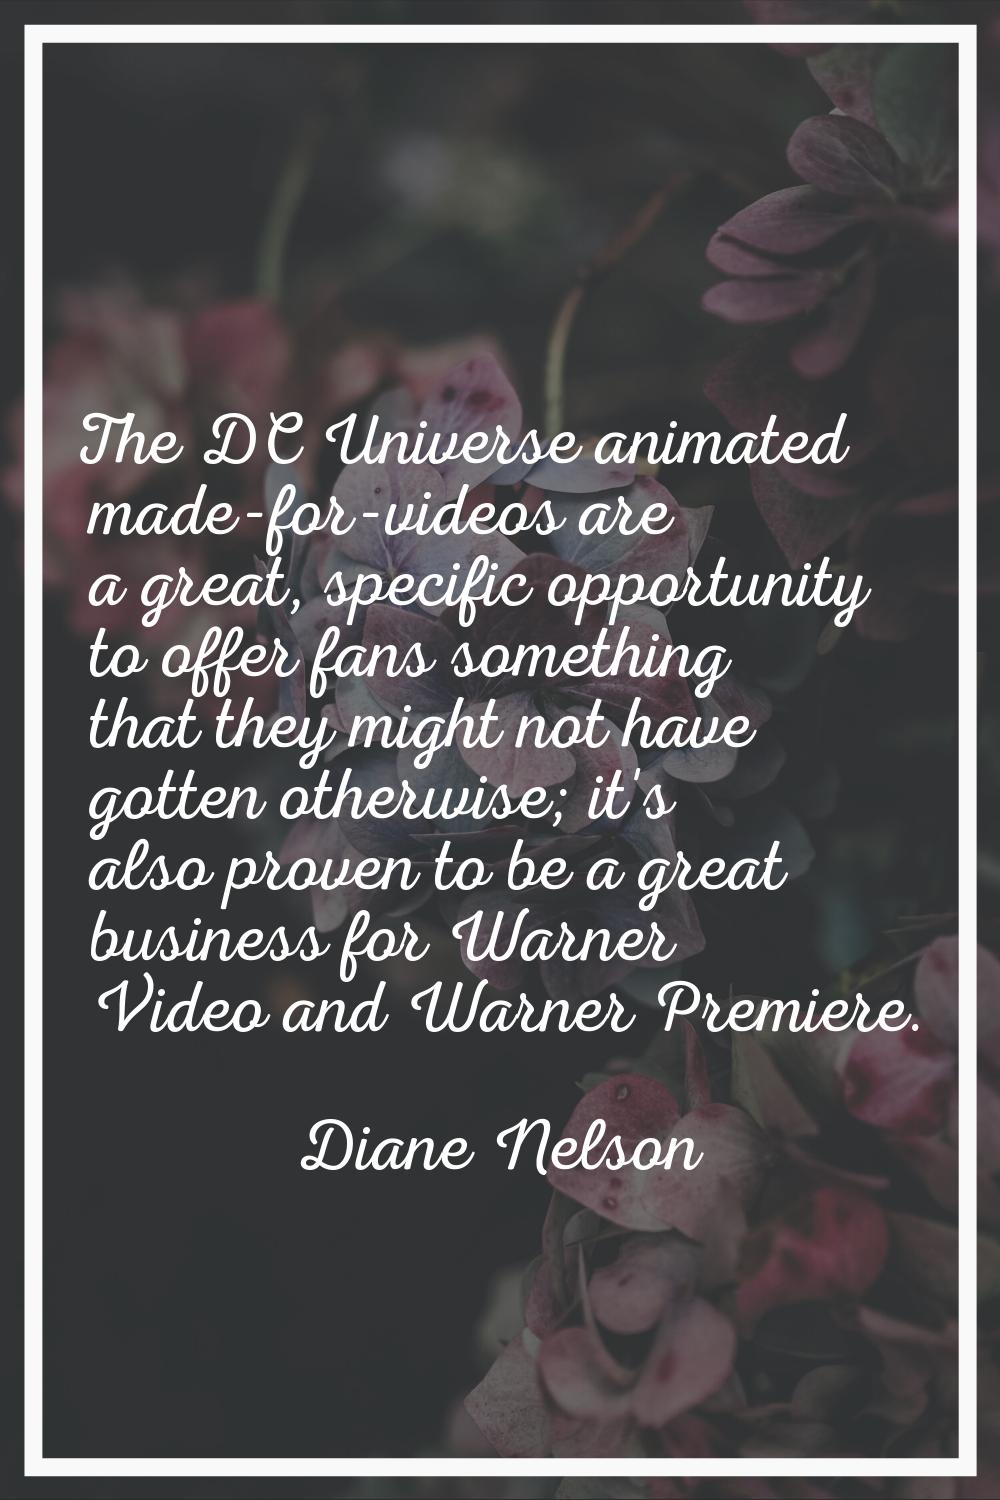 The DC Universe animated made-for-videos are a great, specific opportunity to offer fans something 